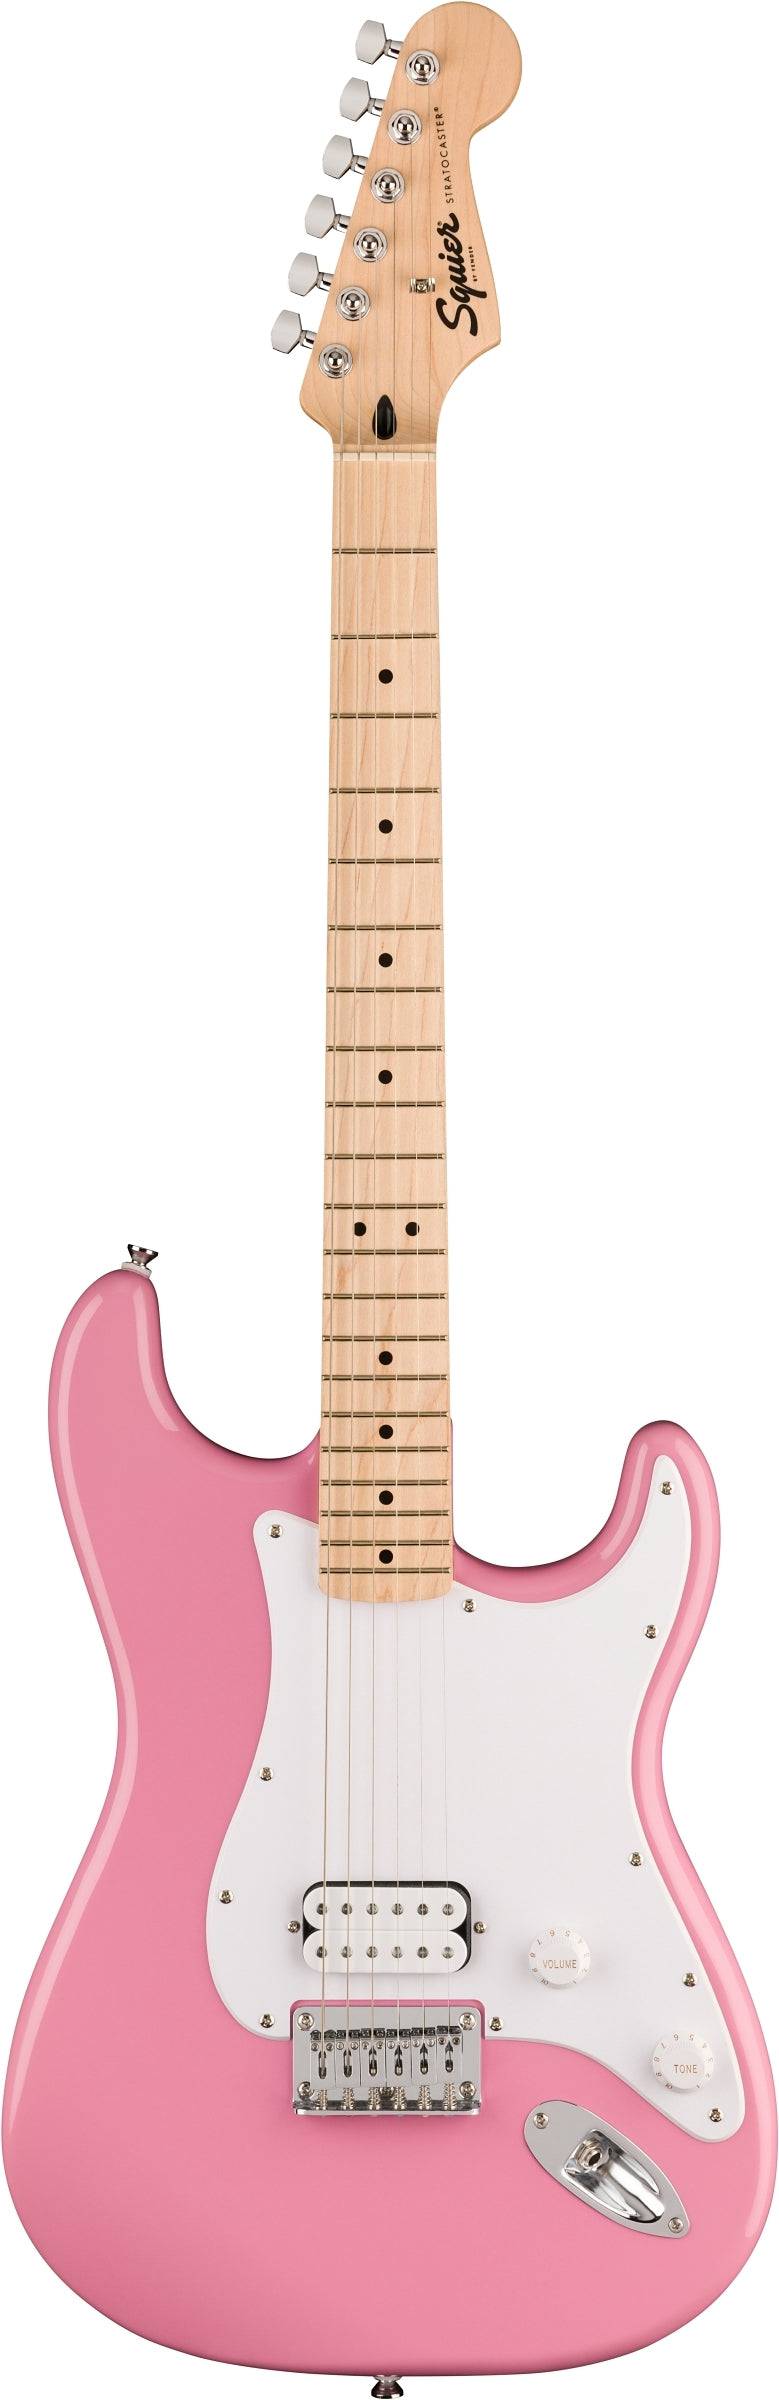 SQUIER SONIC STRATOCASTER HT H MN FLASH PINK - Joondalup Music Centre